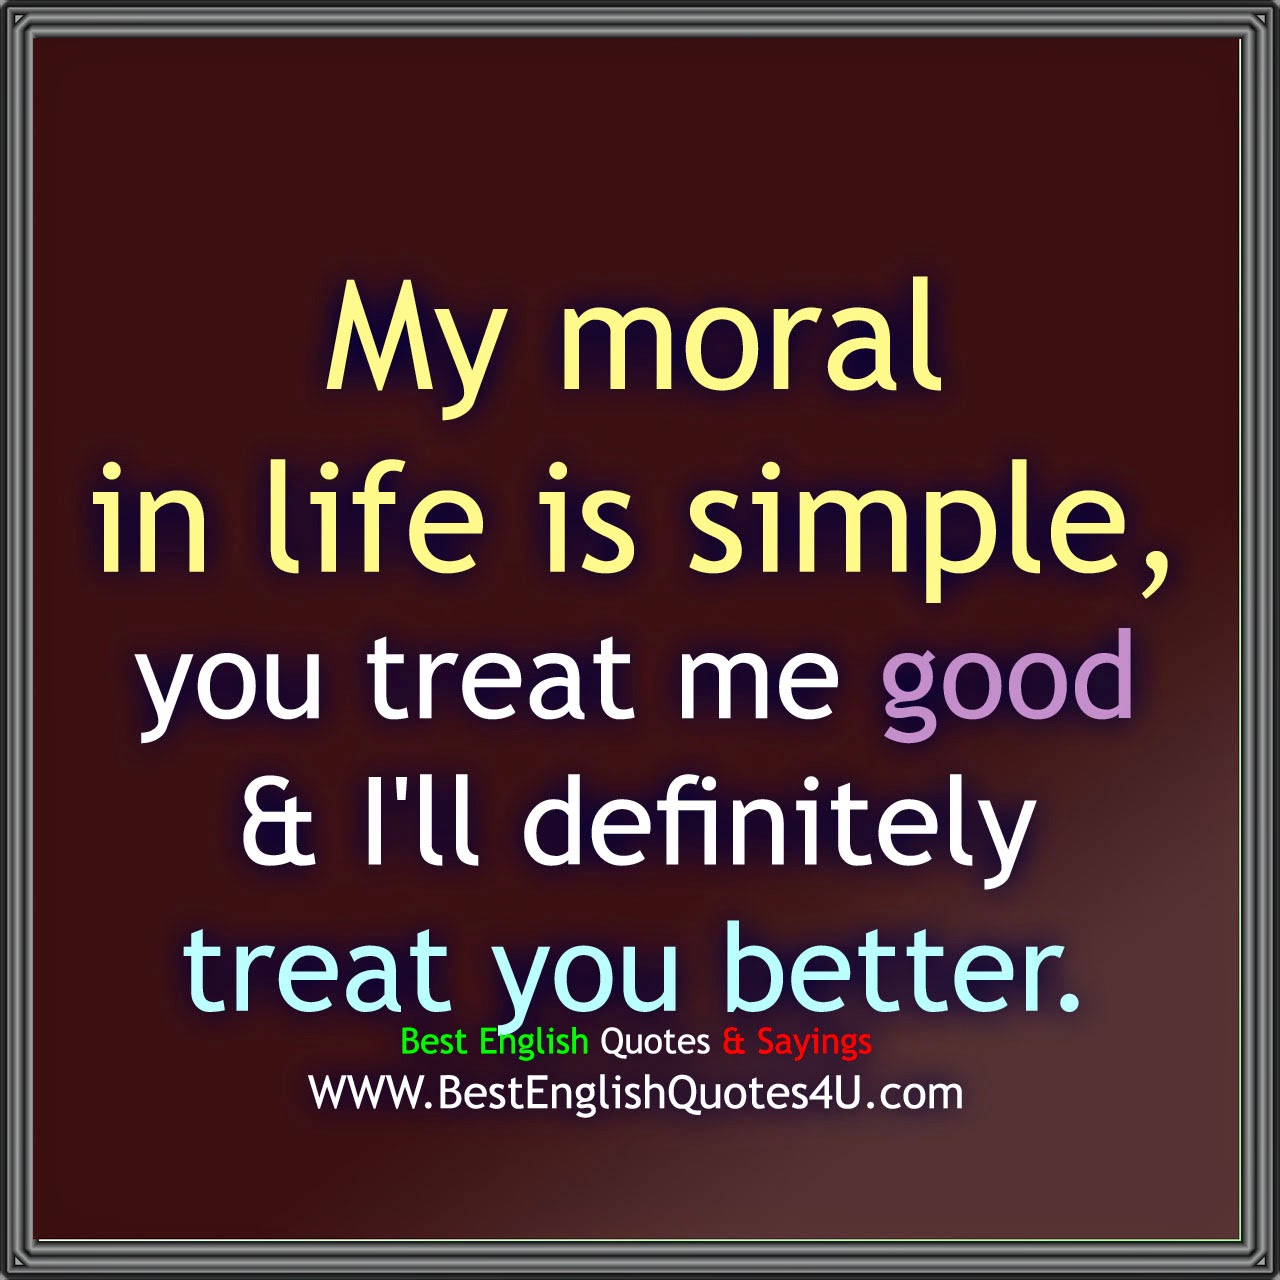 My moral in life is simple